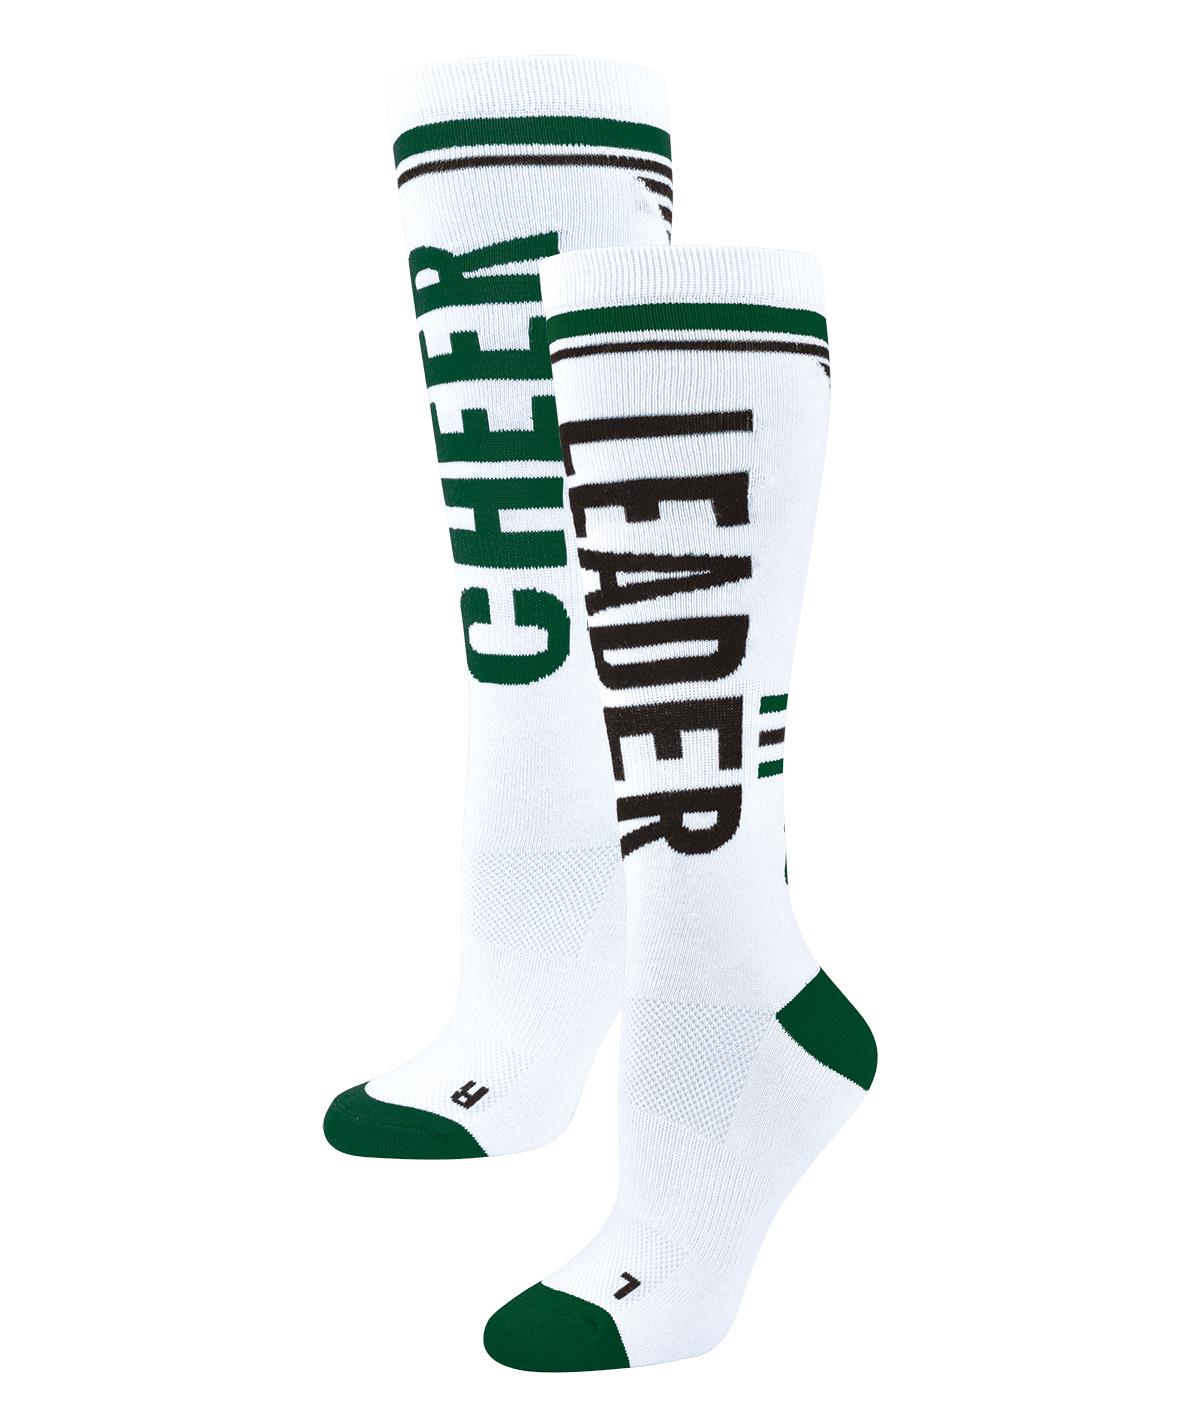 Chasse Knee-High Cheer Mix Sock